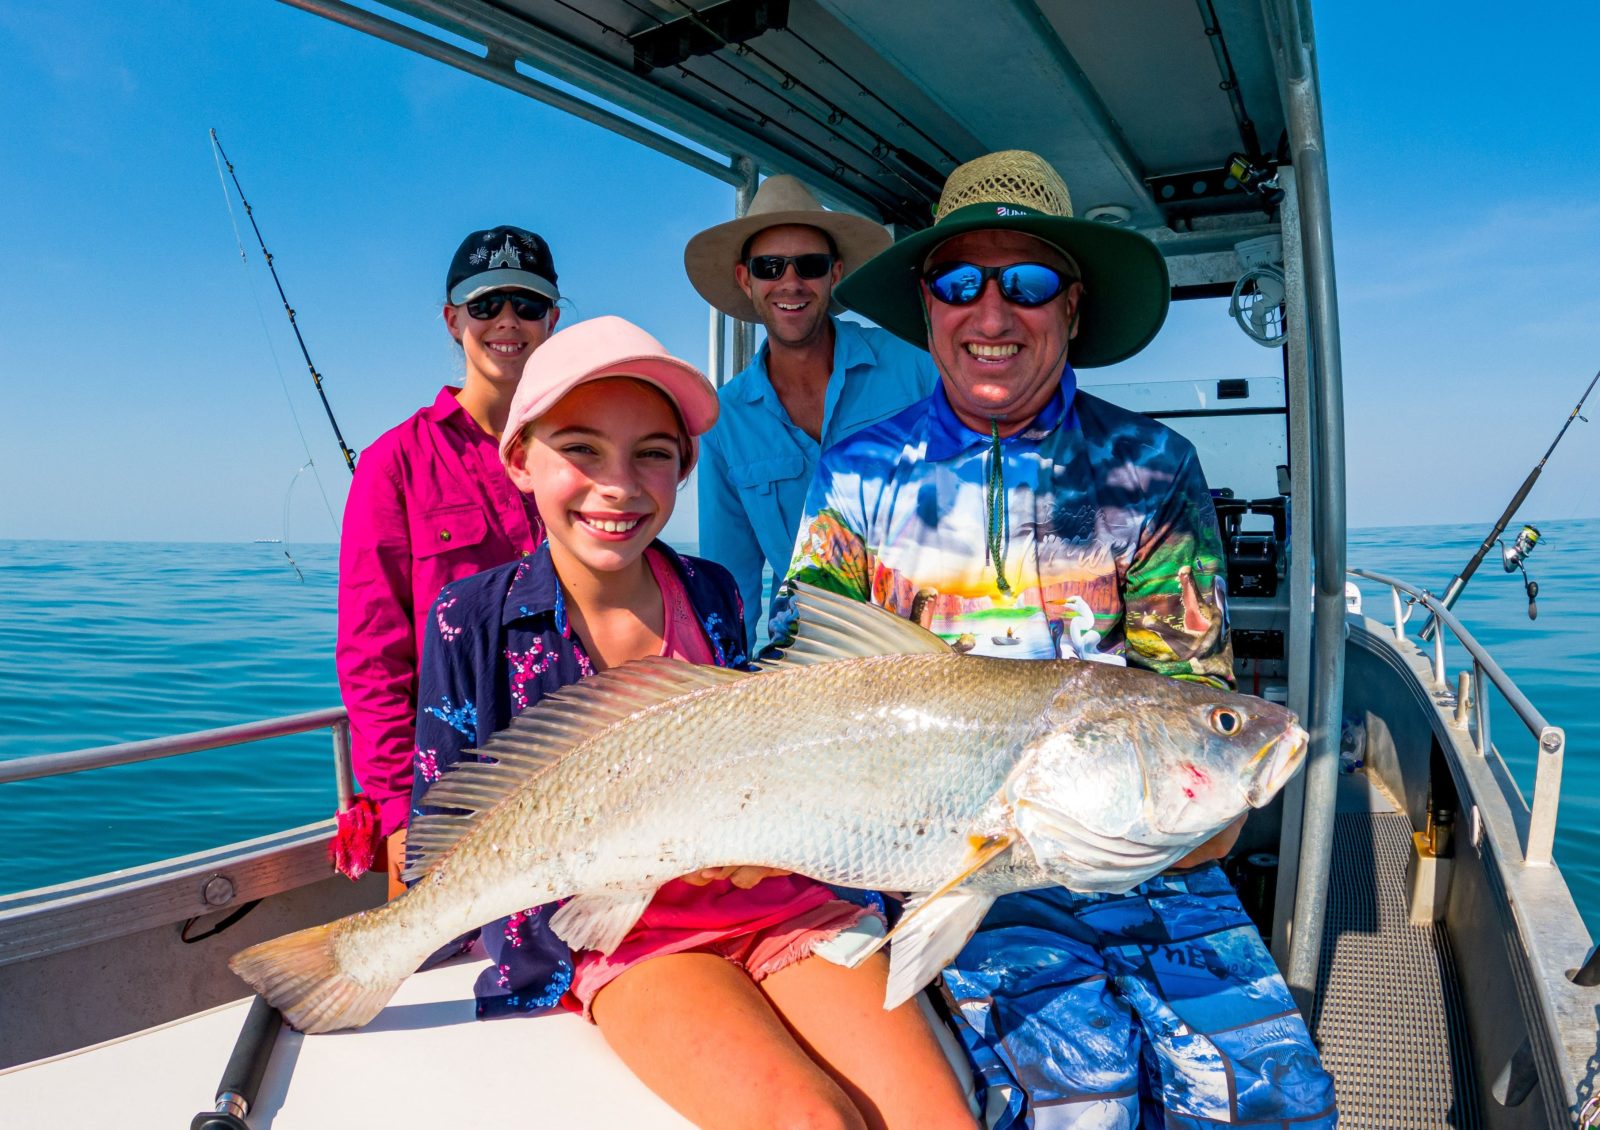 Lovely family from the Hunter Valley in NSW certainly enjoyed their day out of Darwin fishing